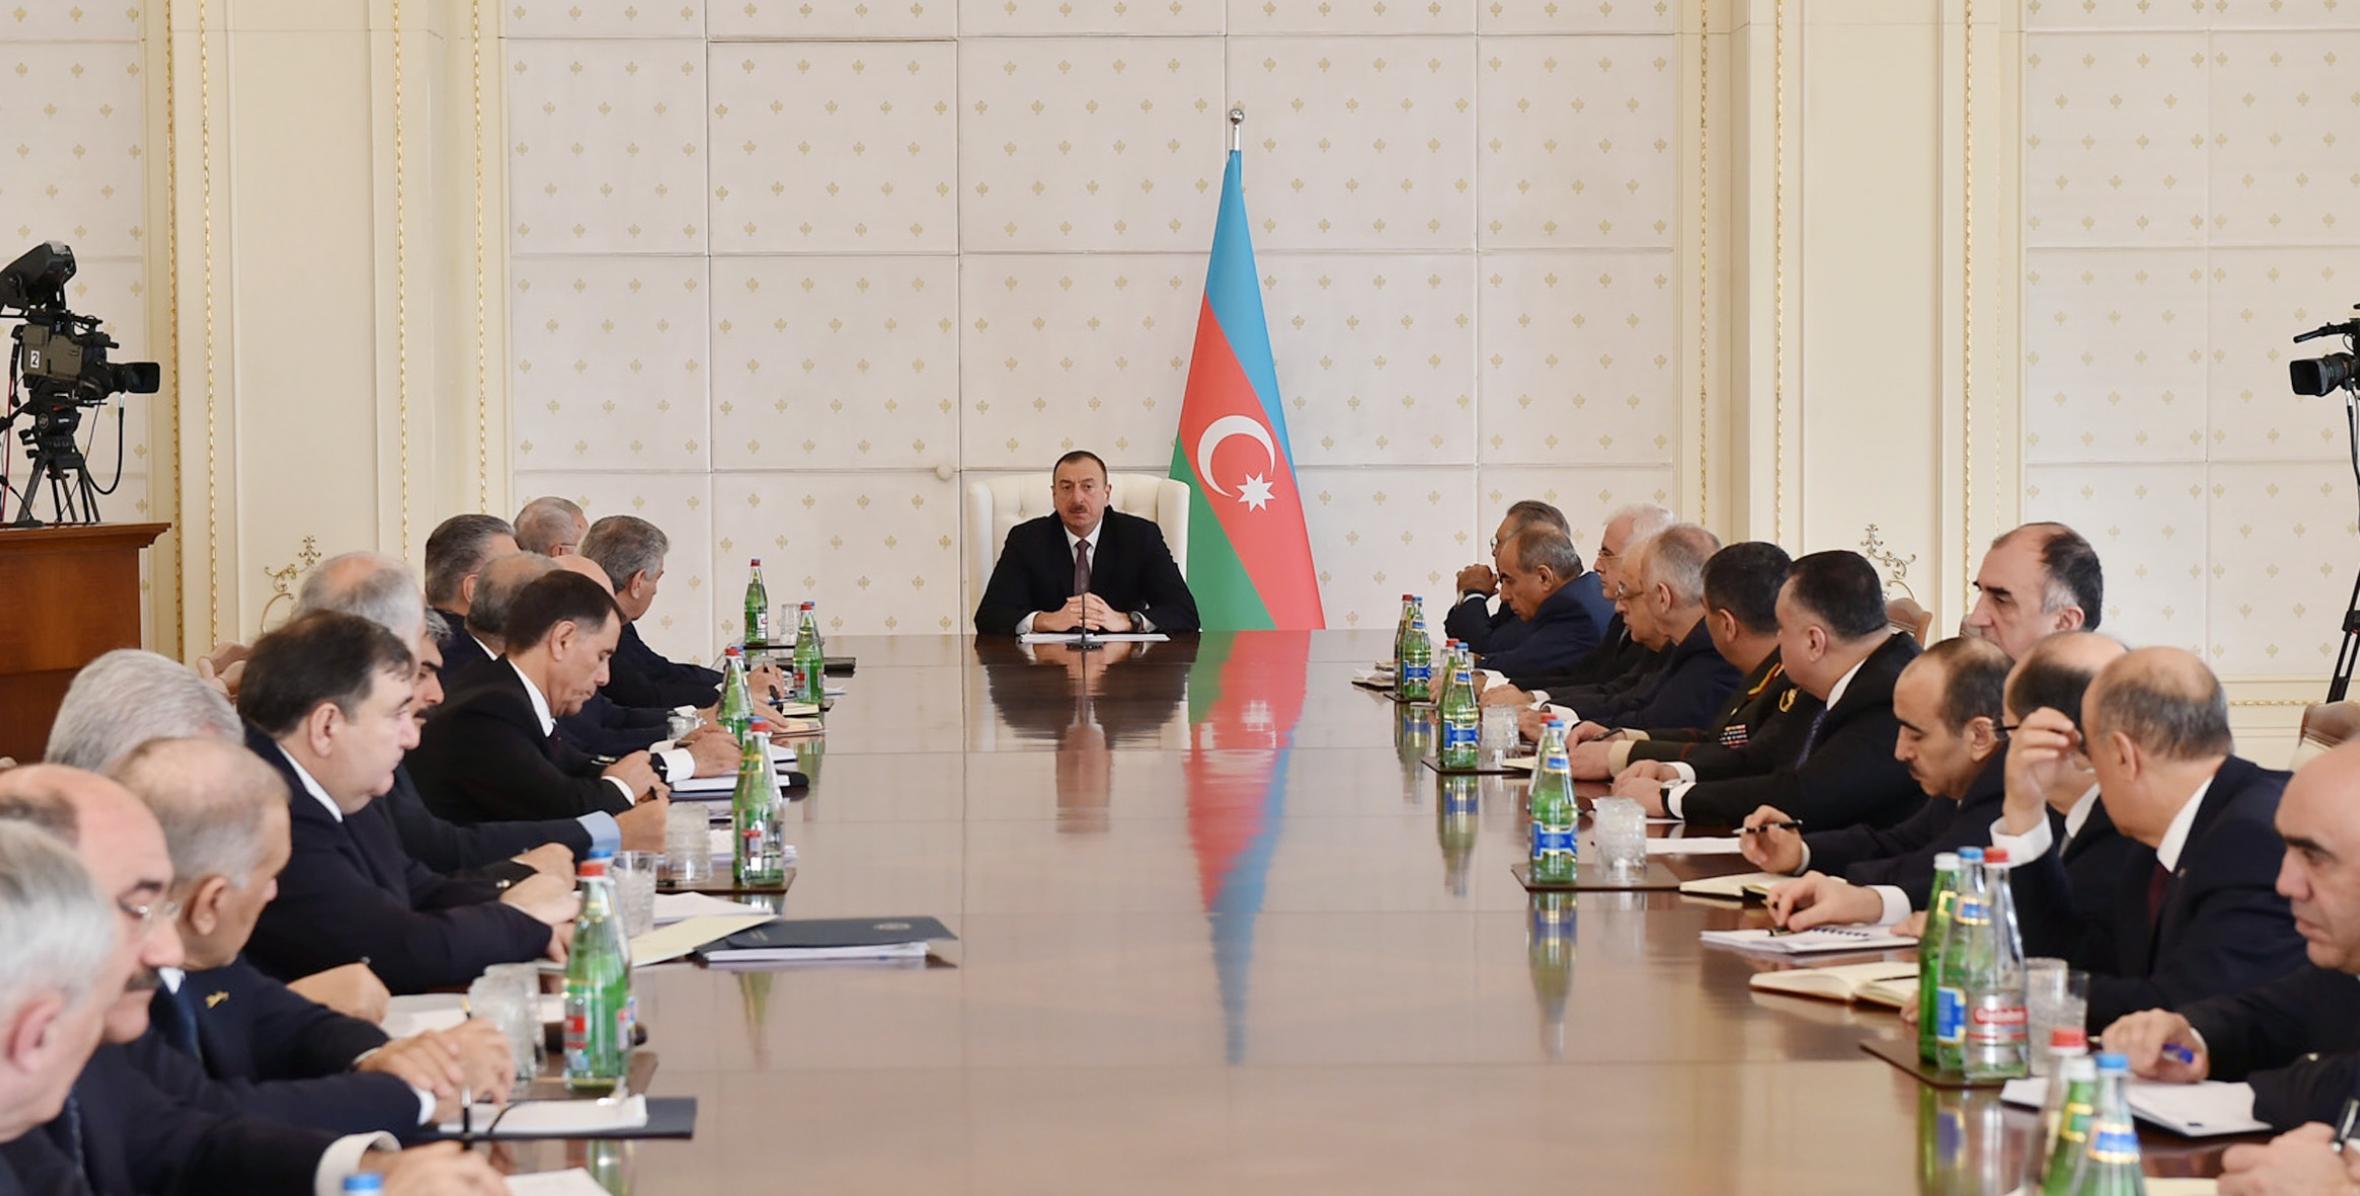 Ilham Aliyev chaired the meeting of the Cabinet of Ministers dedicated to the results of socioeconomic development in the first quarter of 2015 and objectives for the future